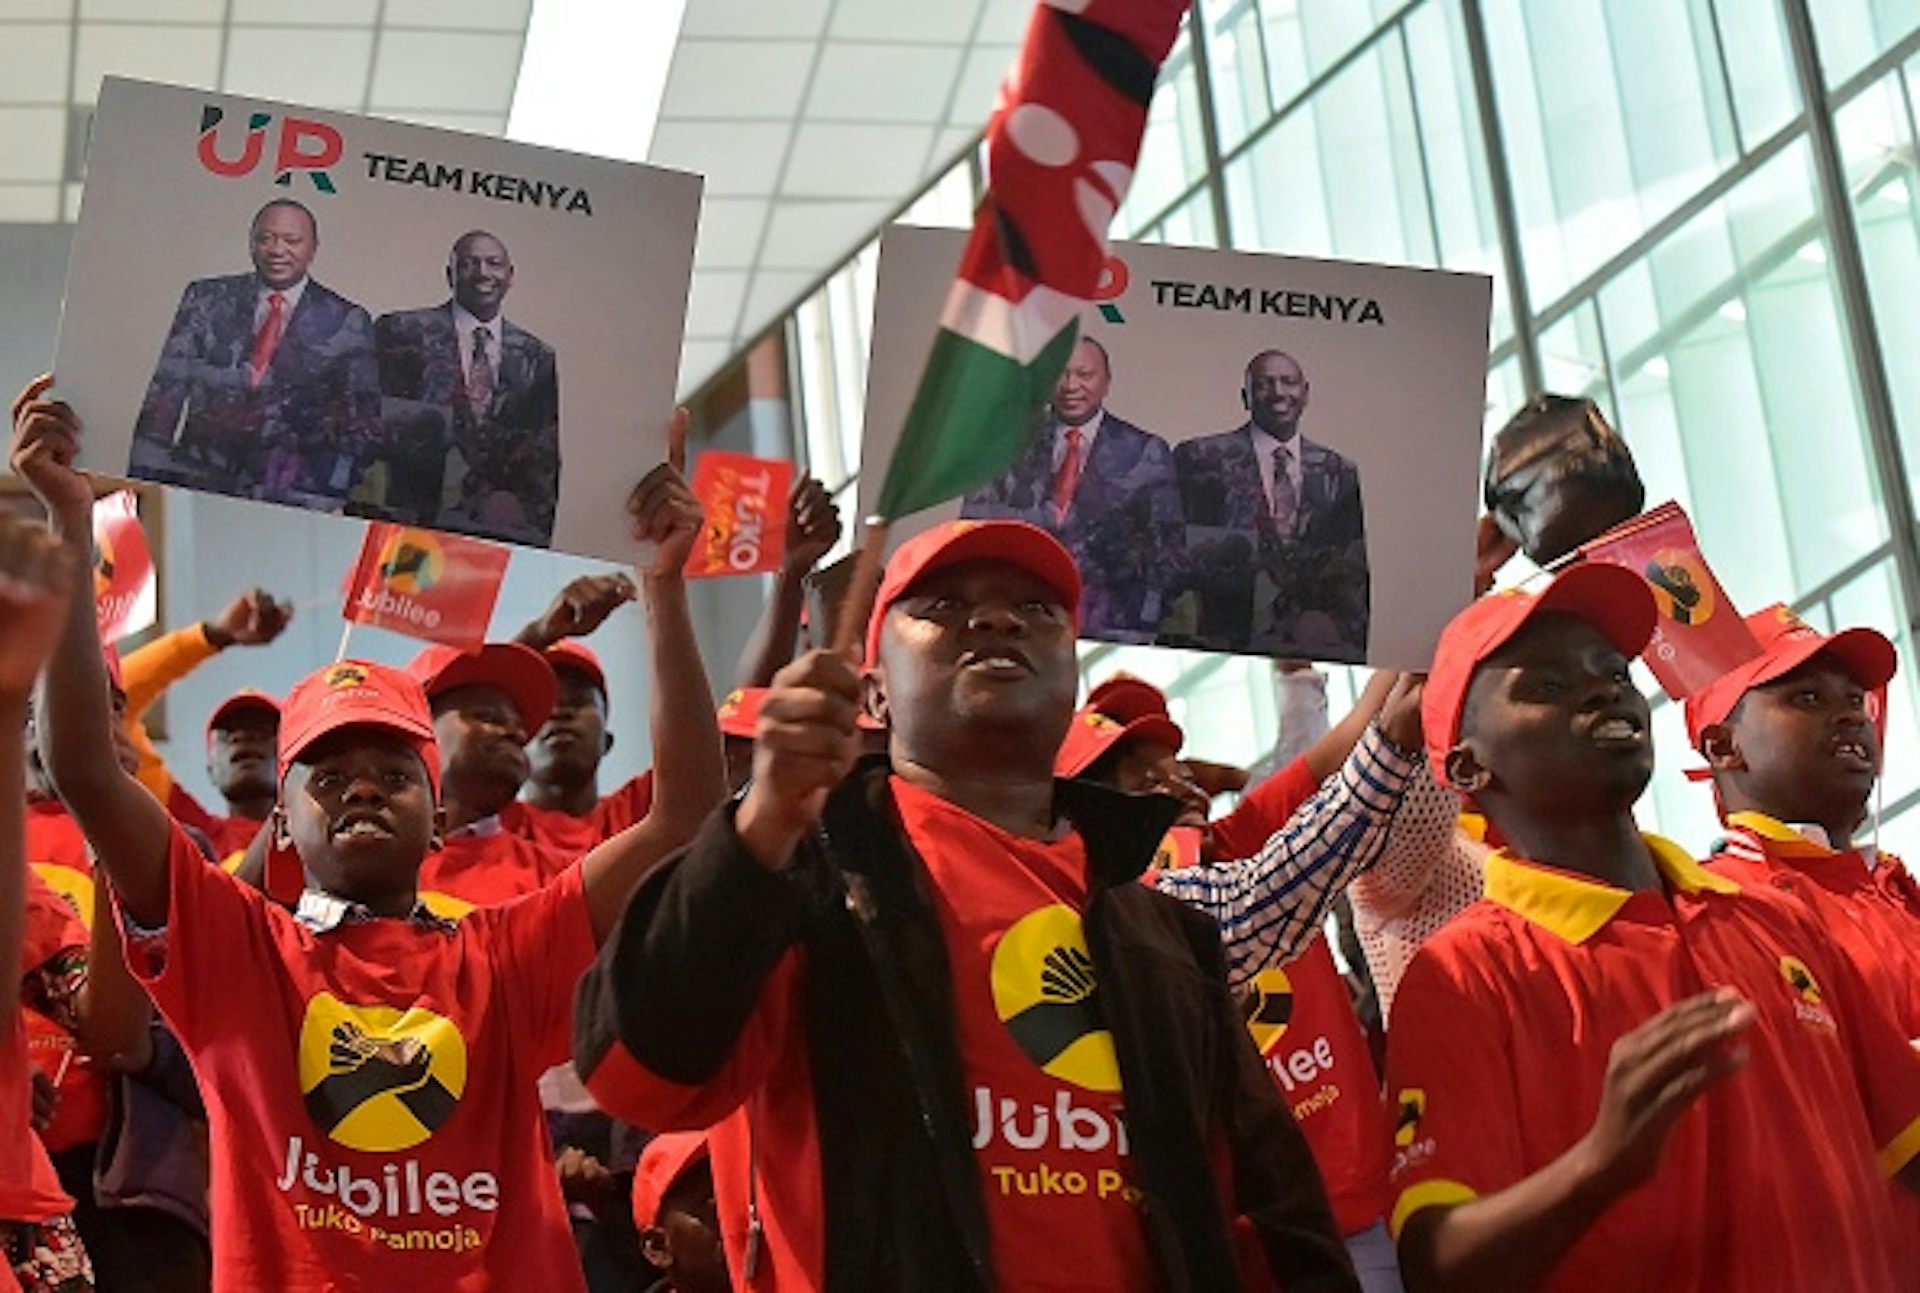 Supporters at the launch of the Jubilee Party manifesto in Nairobi, Kenya, in June 2017.